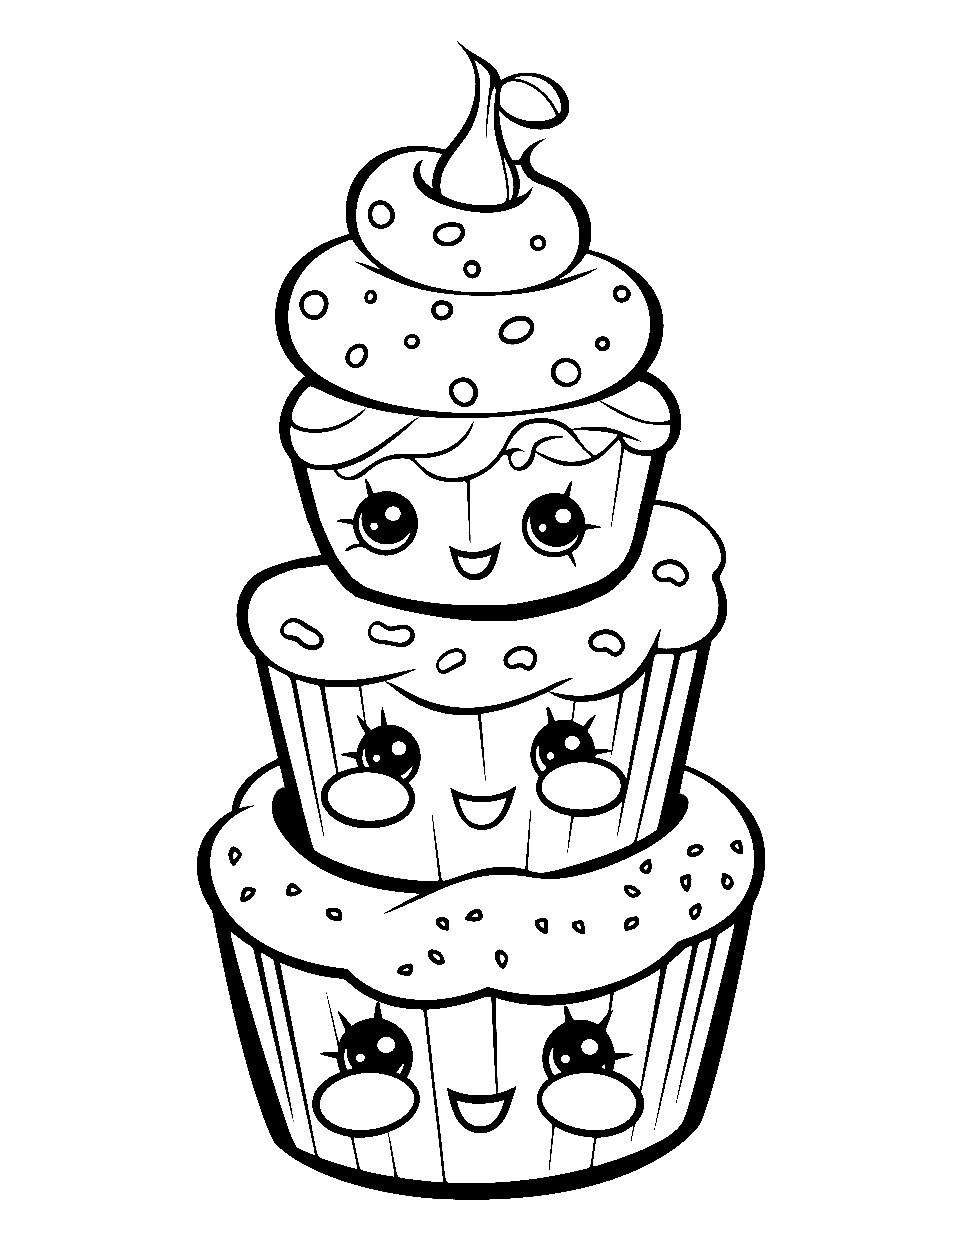 Cupcake Tower Delight Coloring Page - A towering stack of three cupcakes, each with a cute face.